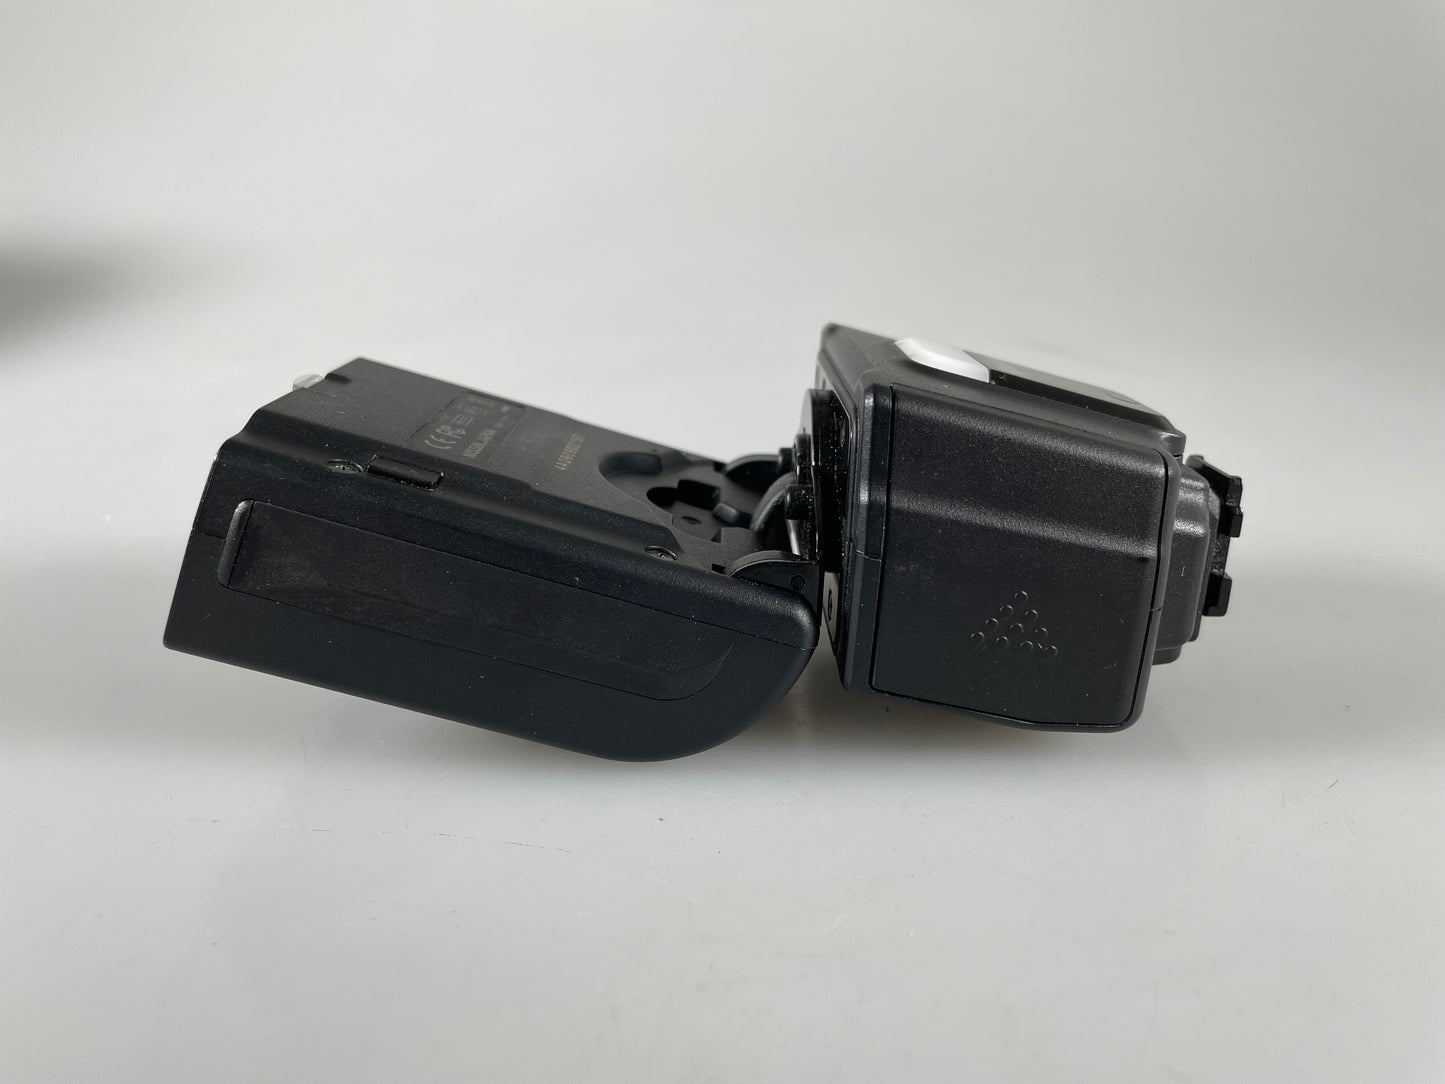 Nissin i40 compact flash for micro 4/3 cameras